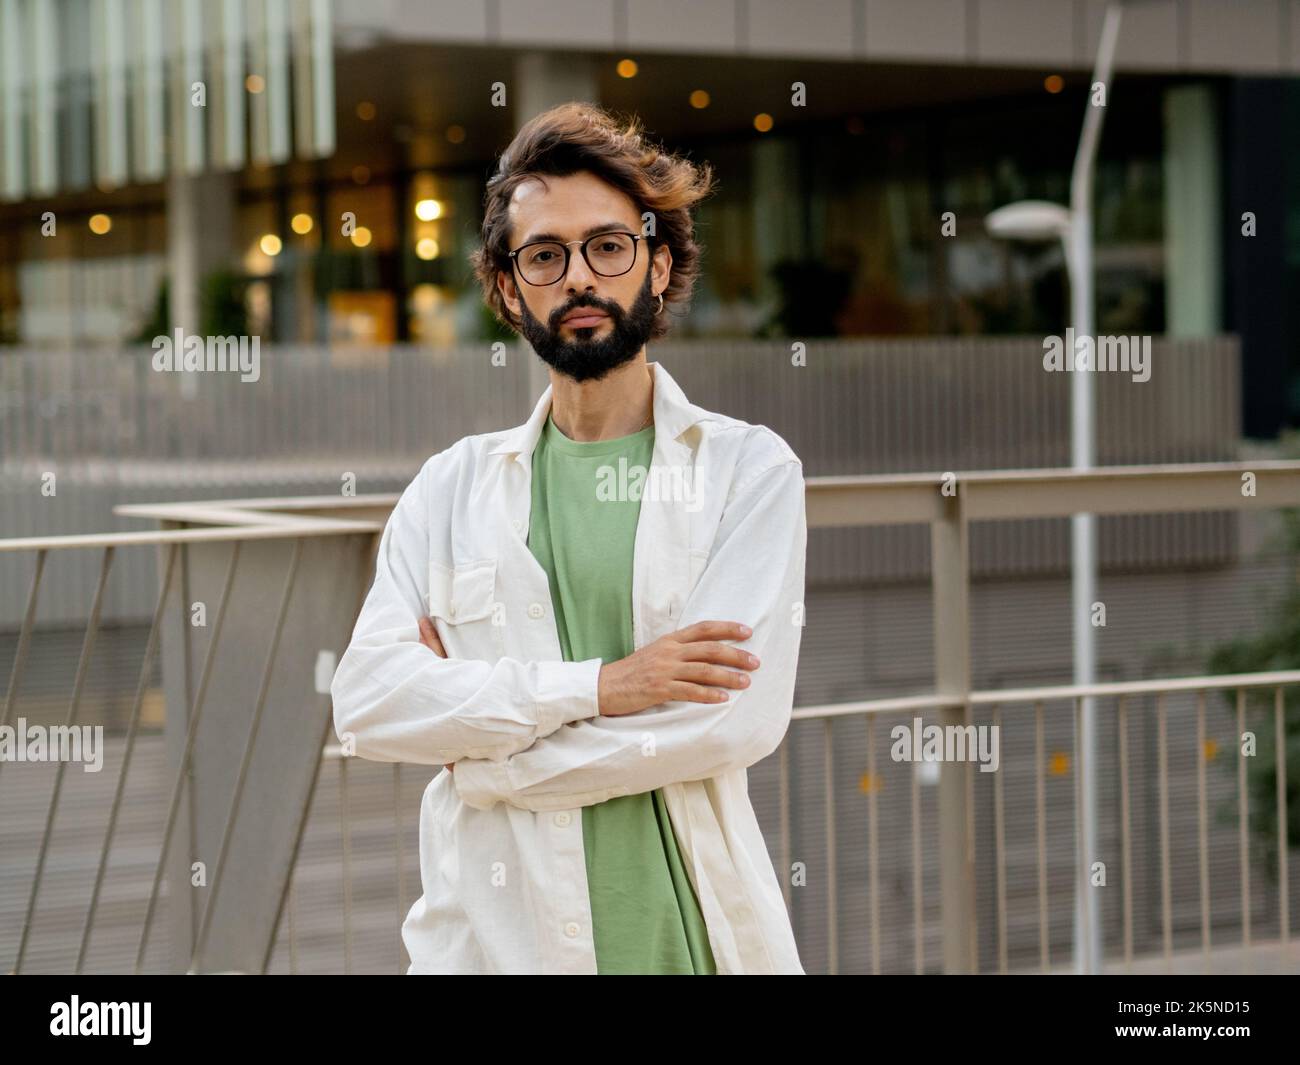 Young digital entrepreneur man seriously looking at camera in a city. Young millennial businessman Stock Photo